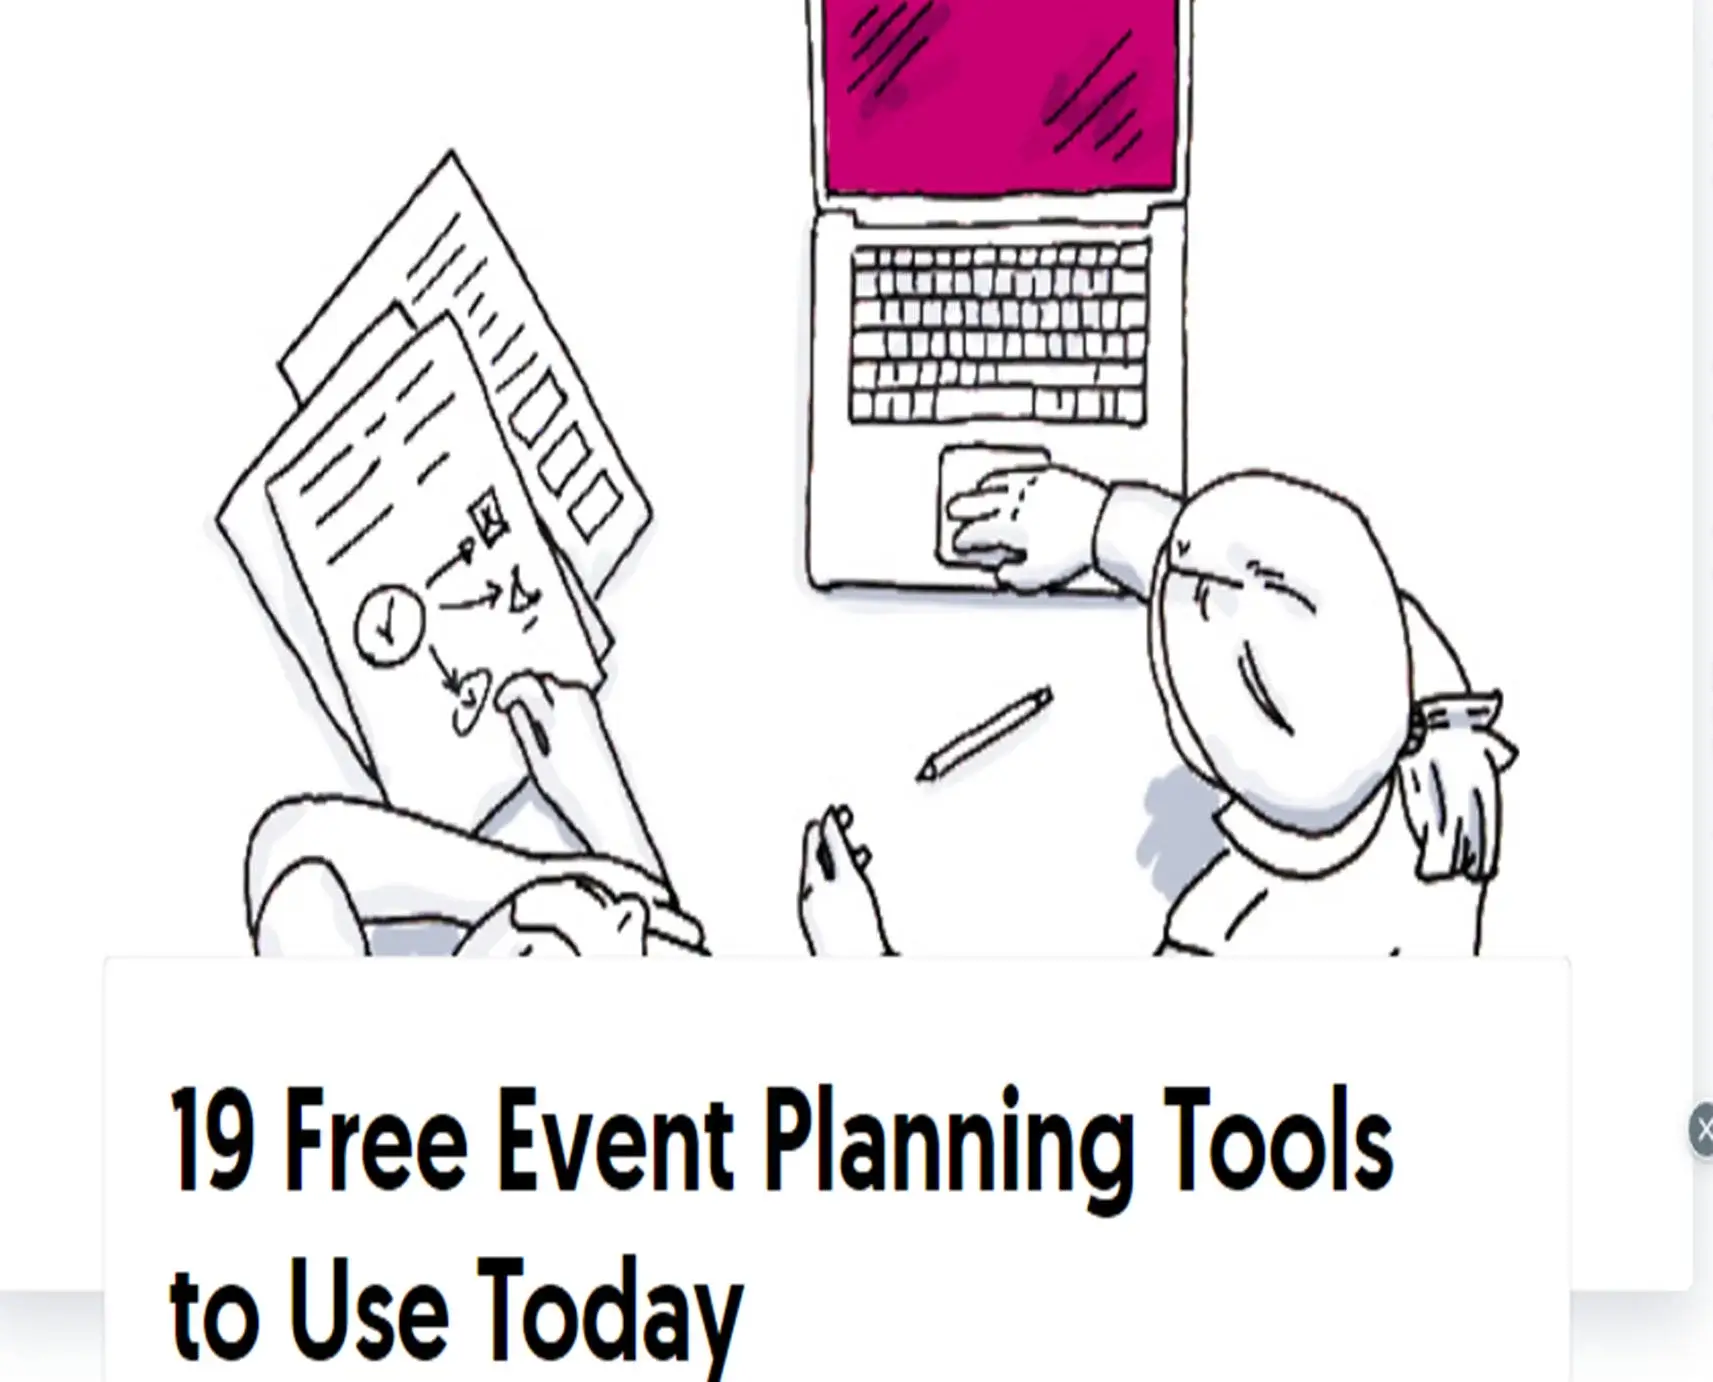 19 Free Event Planning Tools to Use Today